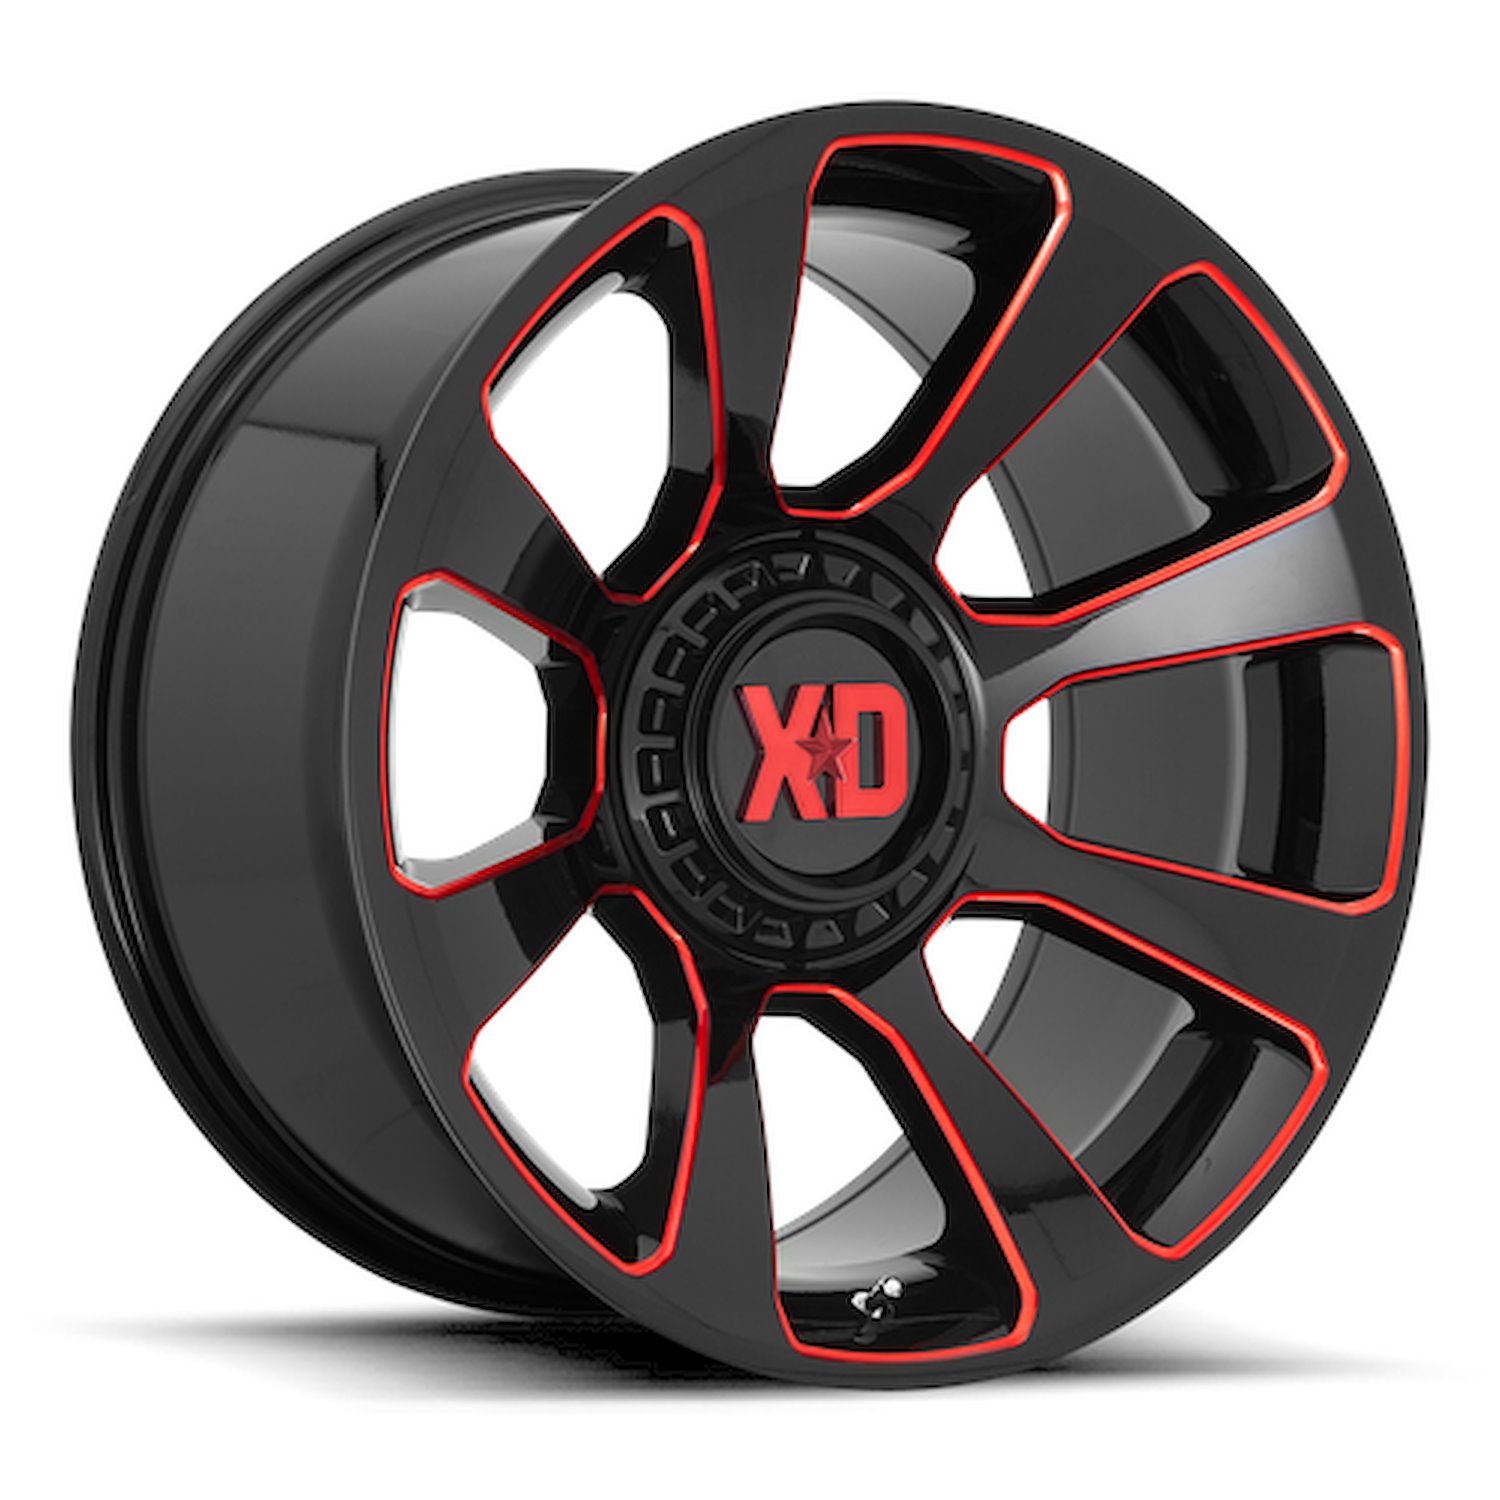 XD Wheels XD854 Reactor Wheel [Size: 20" x 9"] Gloss Black w/ Milled Red Accents